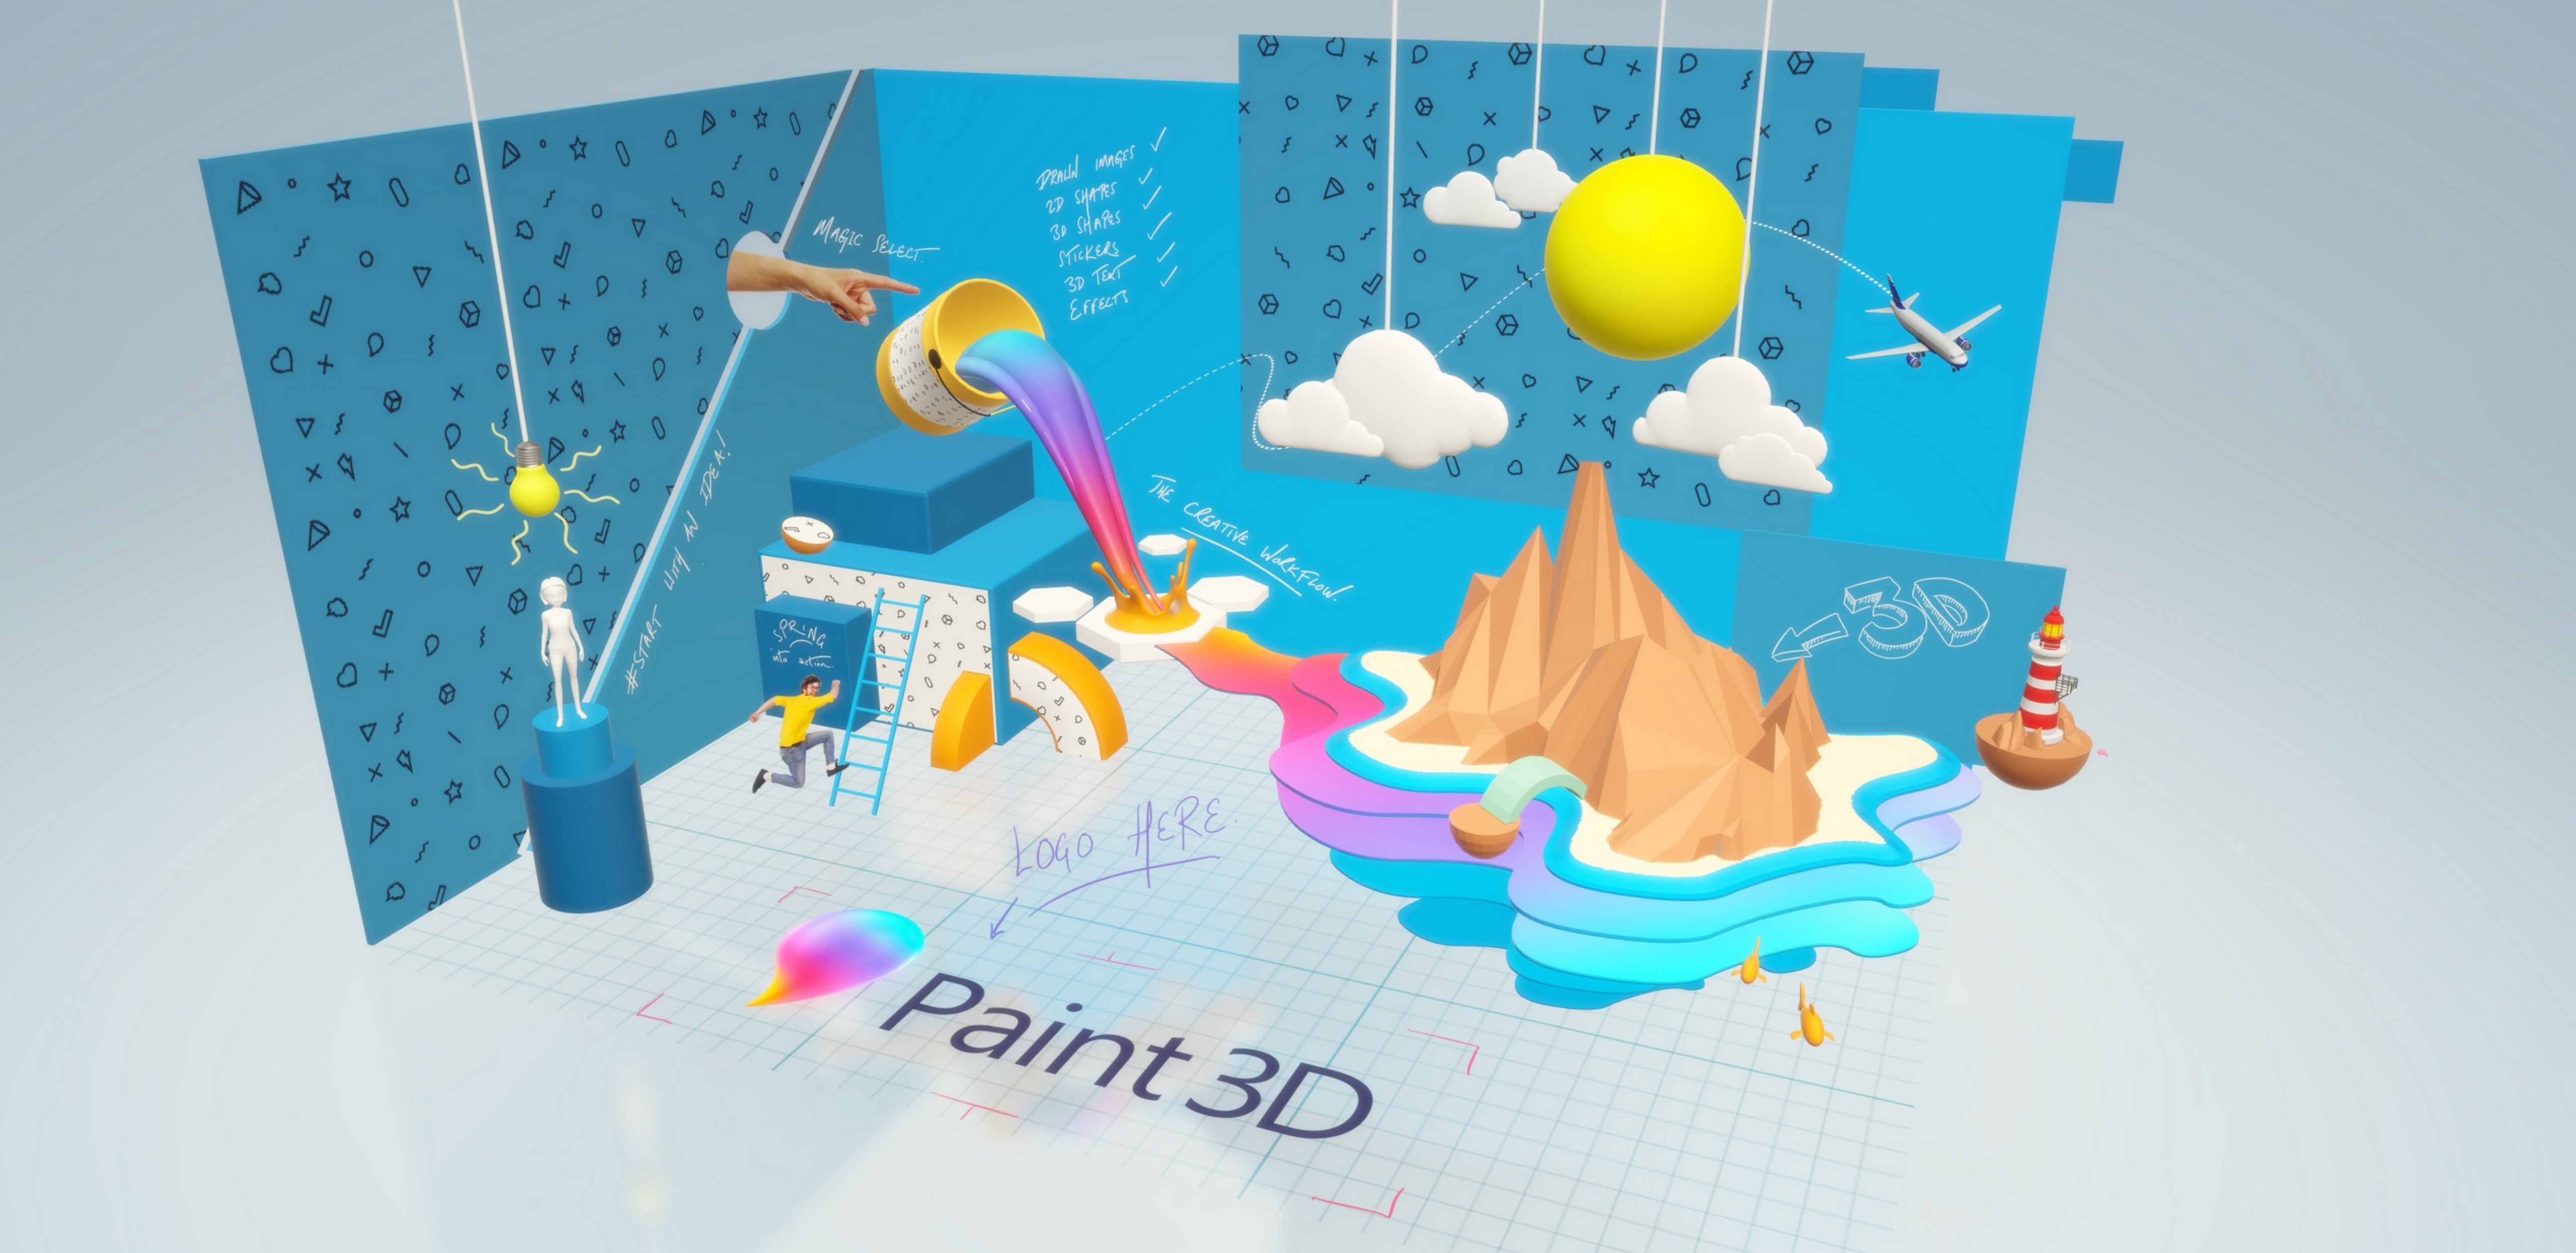 An illustration in Paint 3D